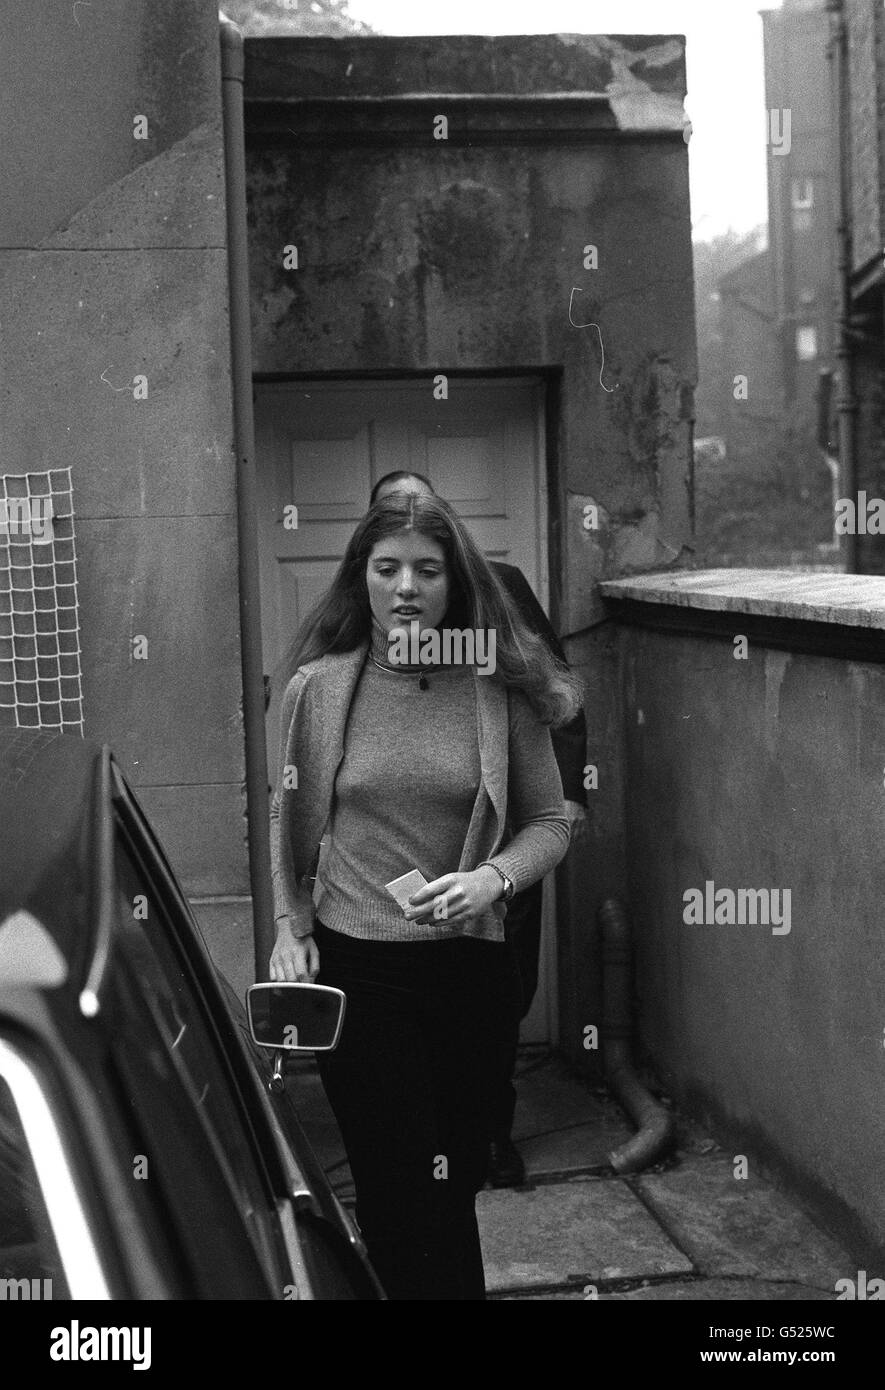 Miss caroline kennedy leaves home lord lady harlech Black and White ...